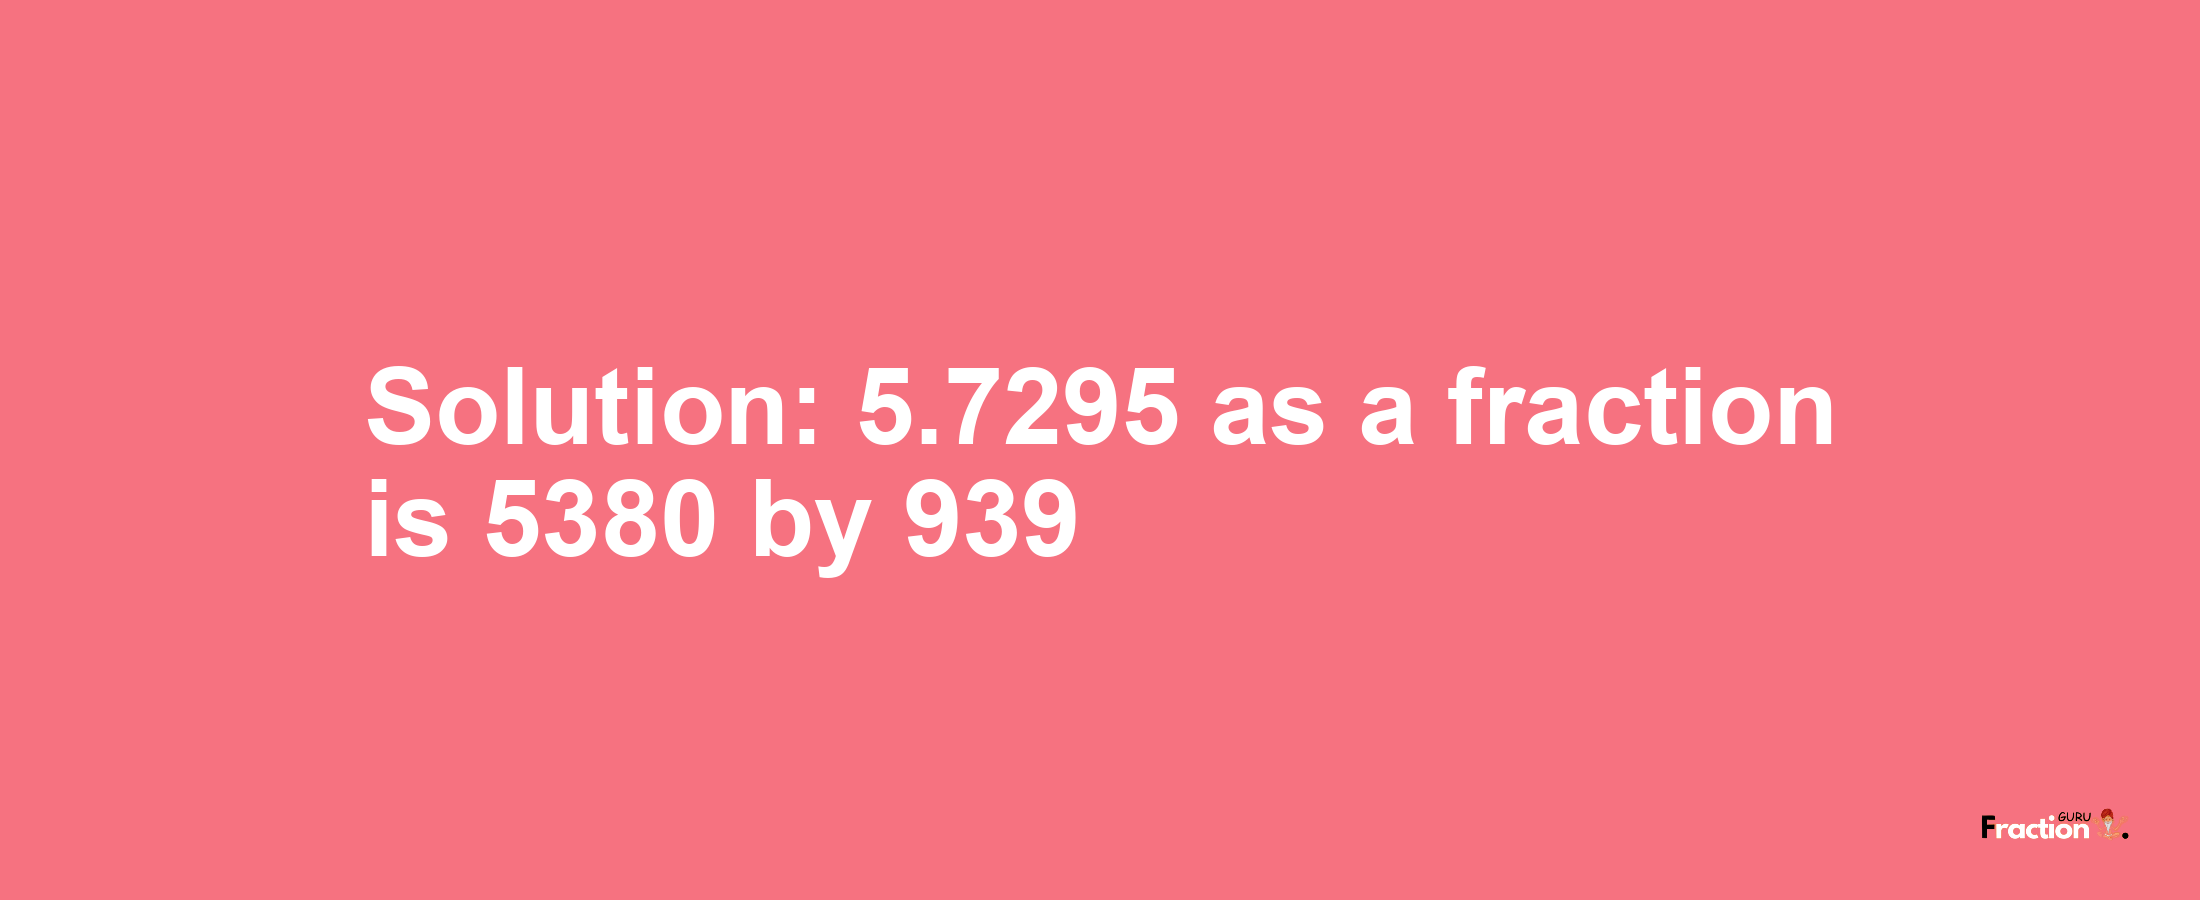 Solution:5.7295 as a fraction is 5380/939